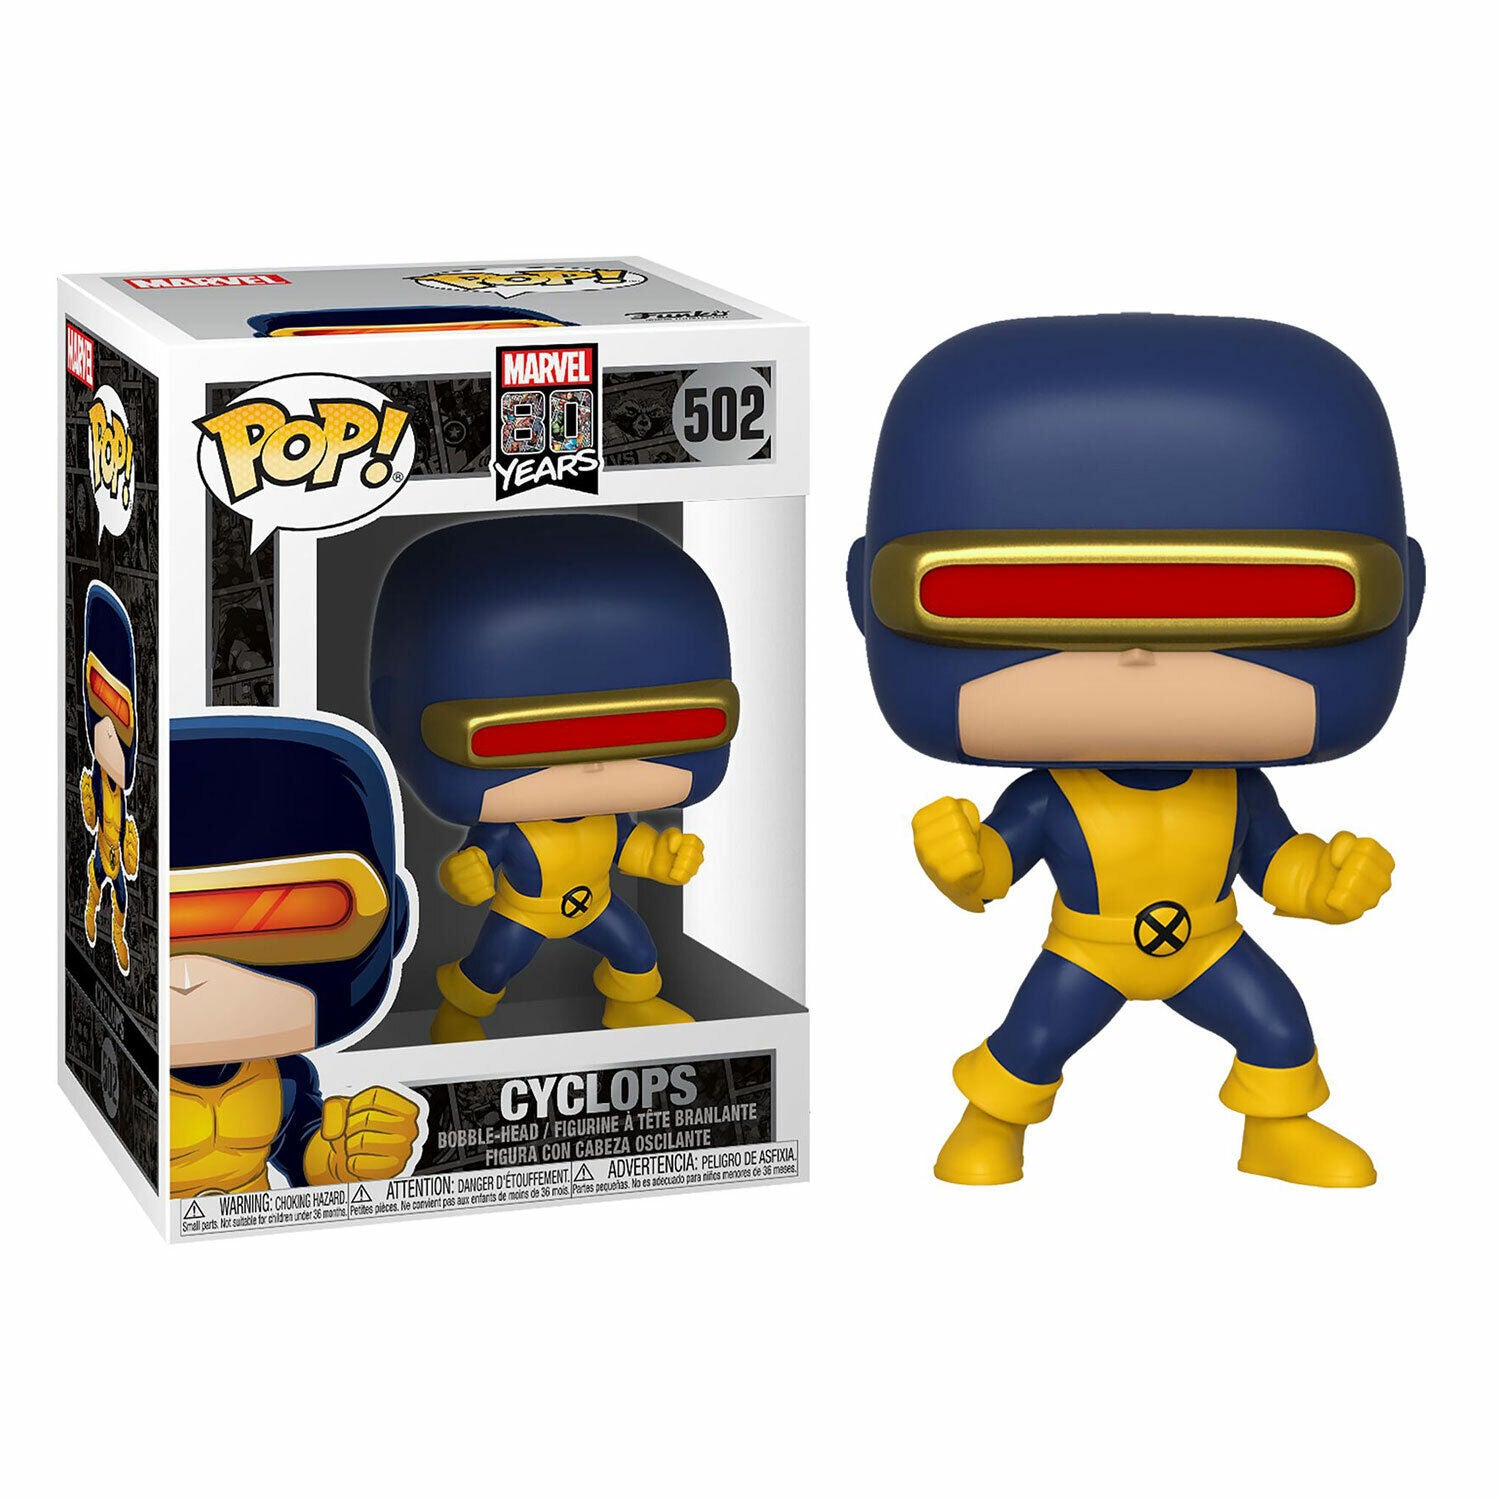 Marvel 80 Years Cyclops Pop! Vinyl Figure - First Appearance - Brand New